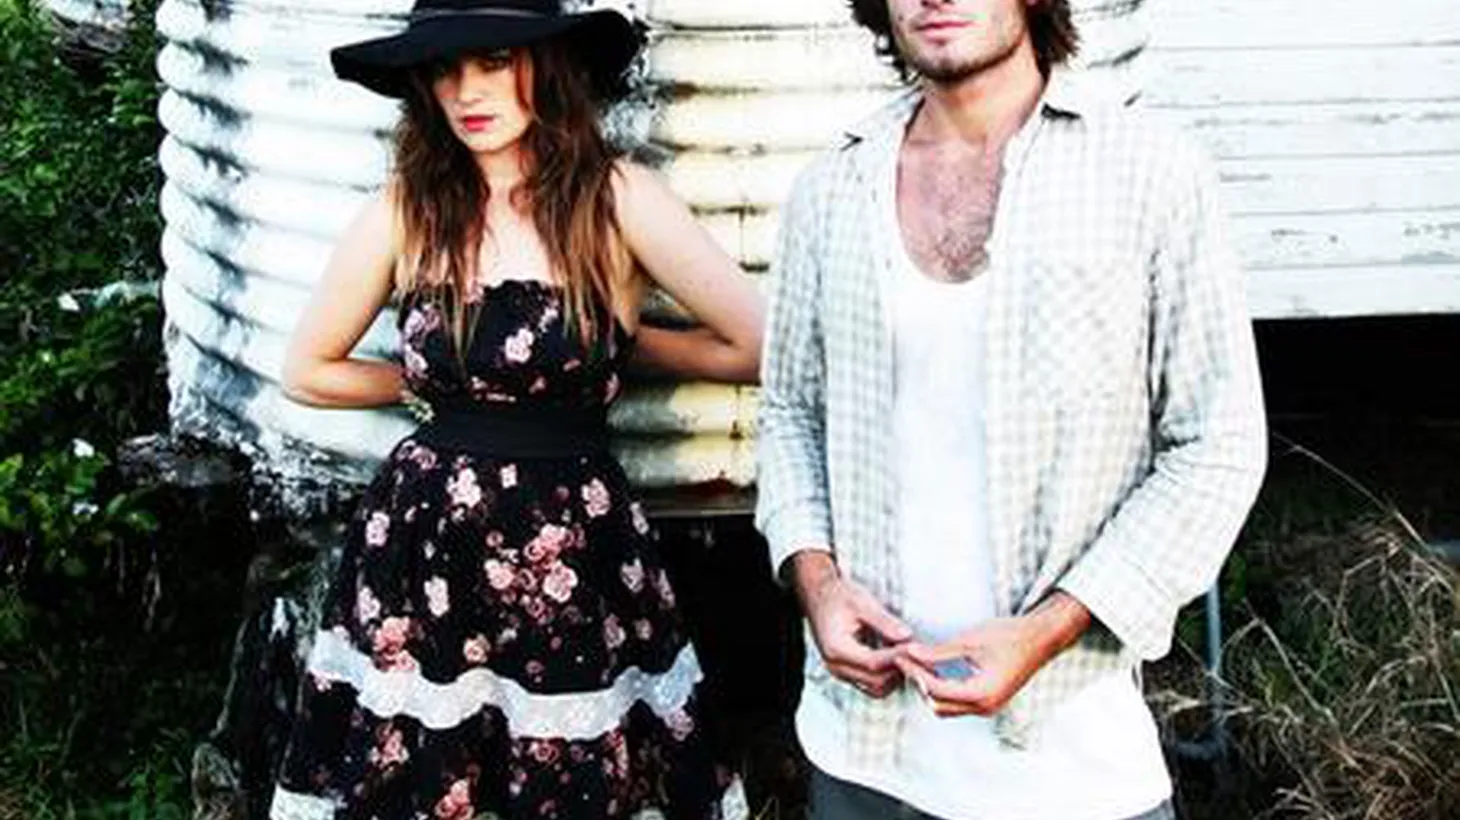 Australian siblings Angus & Julia Stone consistently put out spectacular recordings so we're thrilled for their return to KCRW to perform lush songs from their new release Down The Way on Morning Becomes Eclectic at 11:15am.